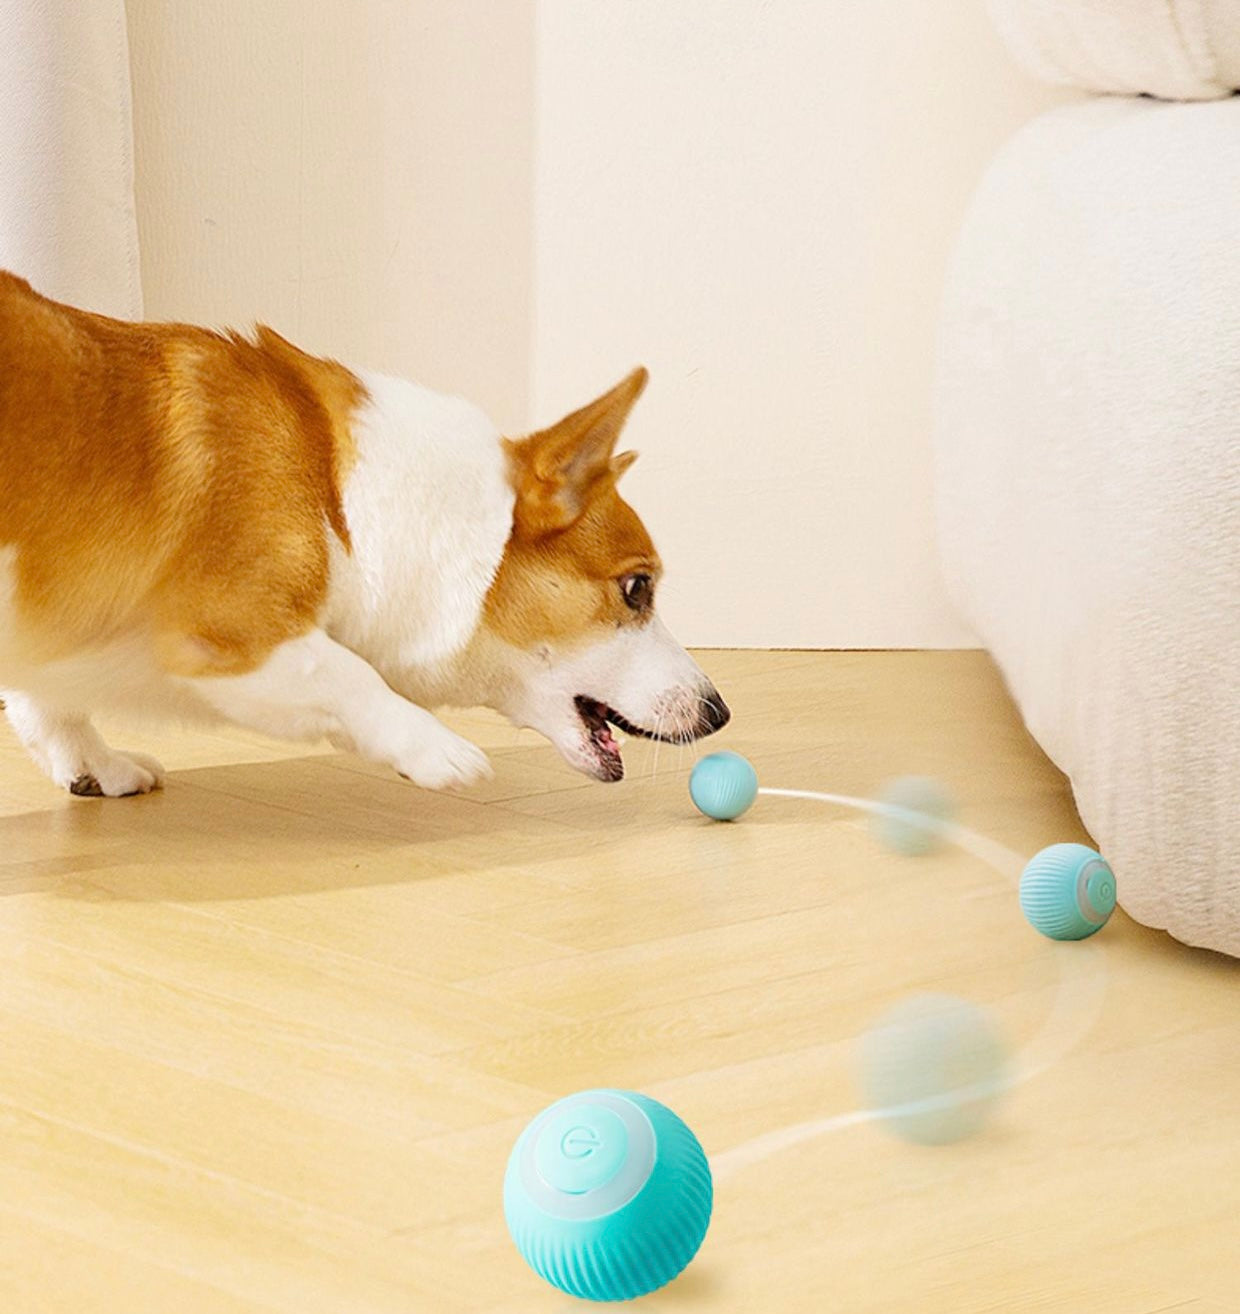 HIPIDOG Smart Interactive Chasing Toy Ball with Built-in LED Light